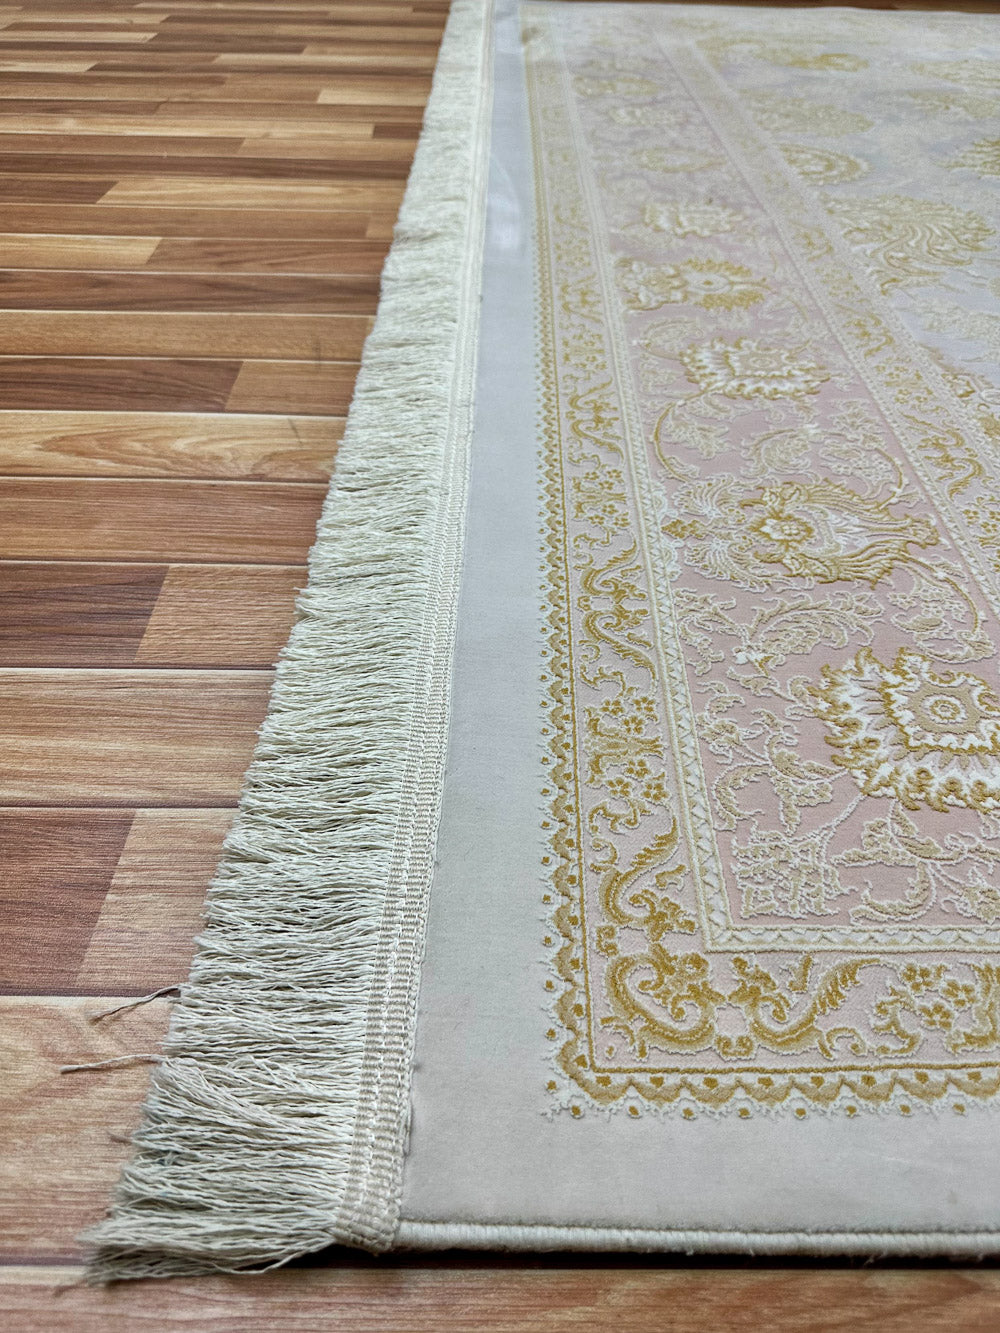 8 ft x 11 ft - Area Rug - Persian 1500 Reeds - Farsh Kakh 1 - Beige and L. Pink